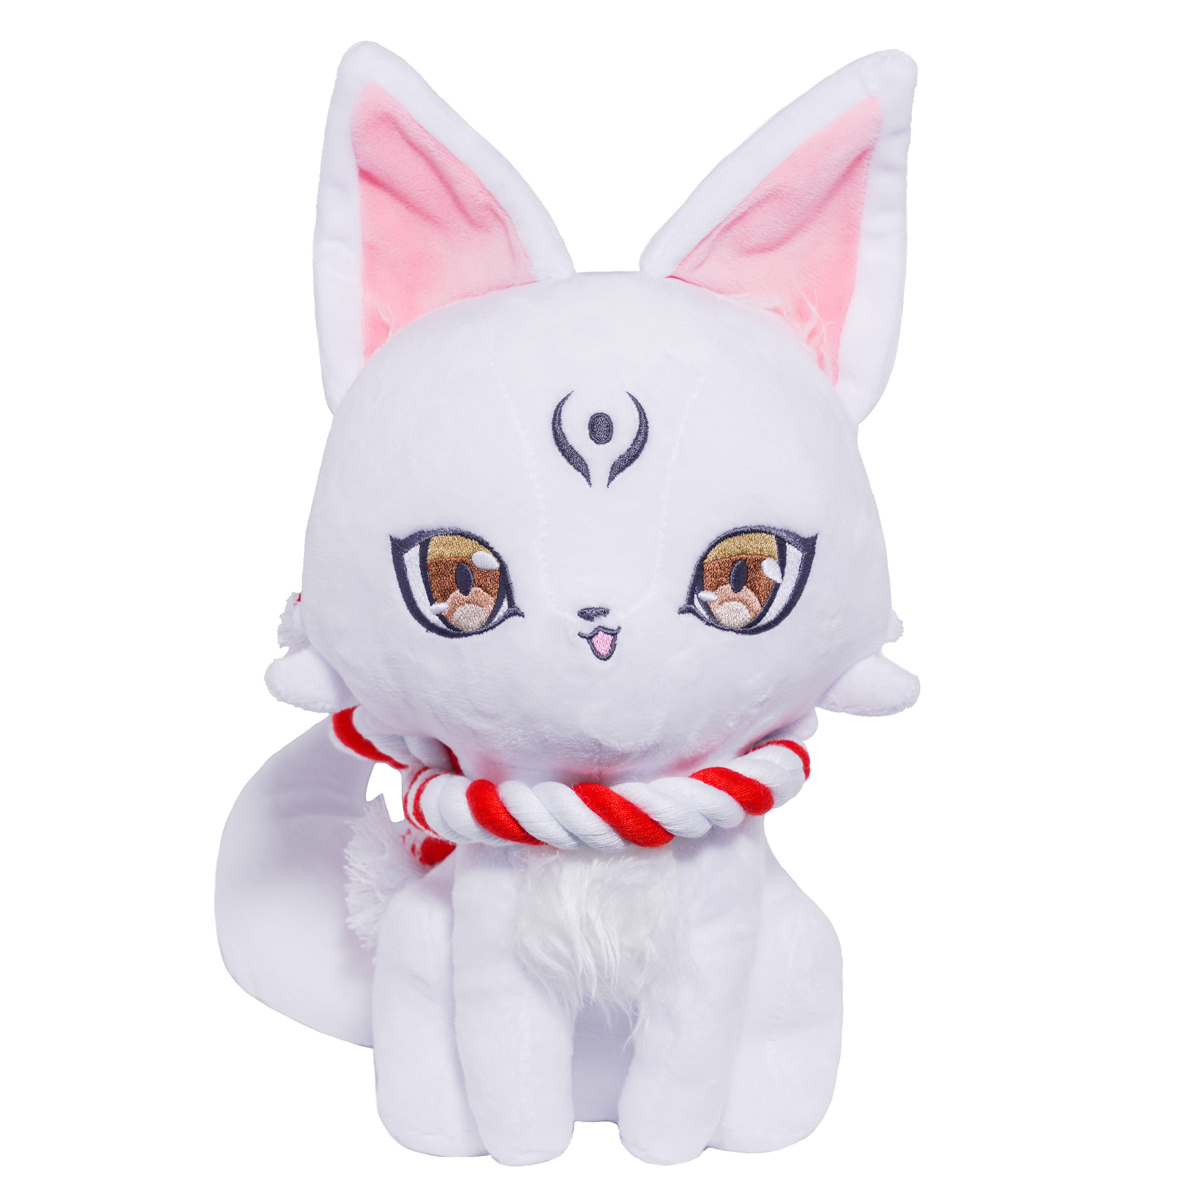 Oboro Plush, I Dont Want to Get Hurt, so Ill Max Out My Defense, 12 Inches, Taito